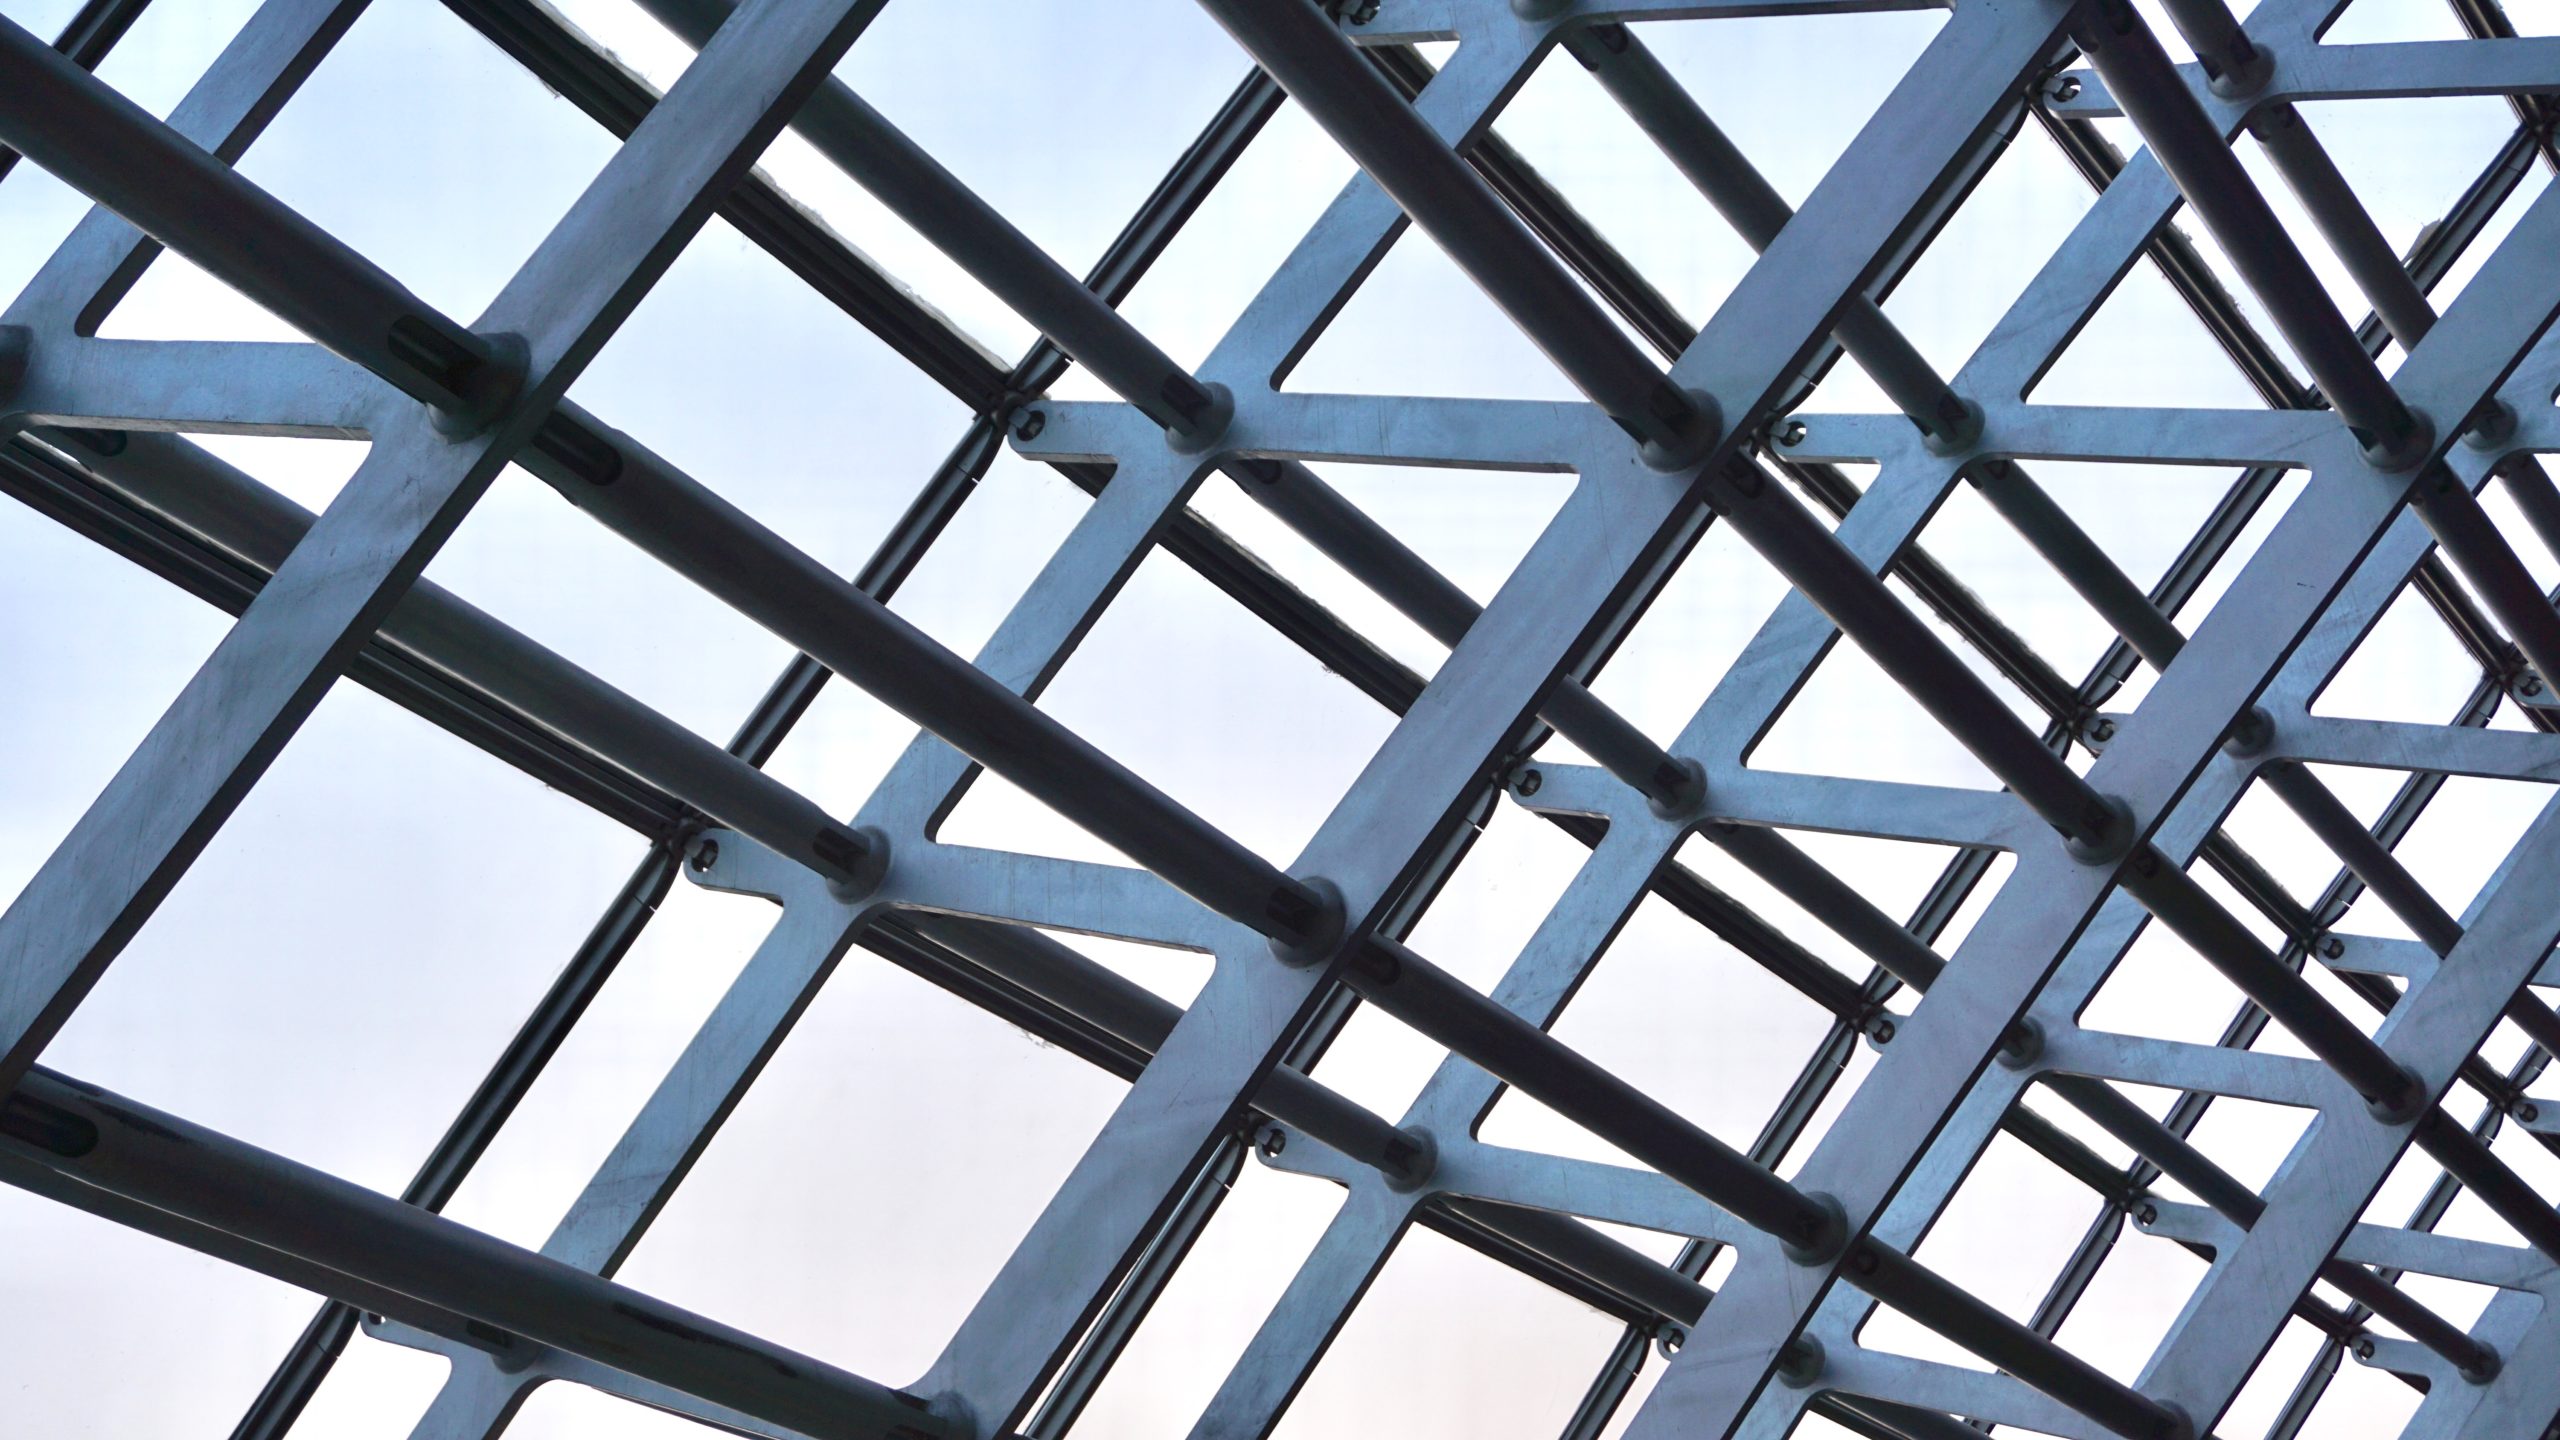 3 Reasons to Use Recycled Steel for Your Construction Project